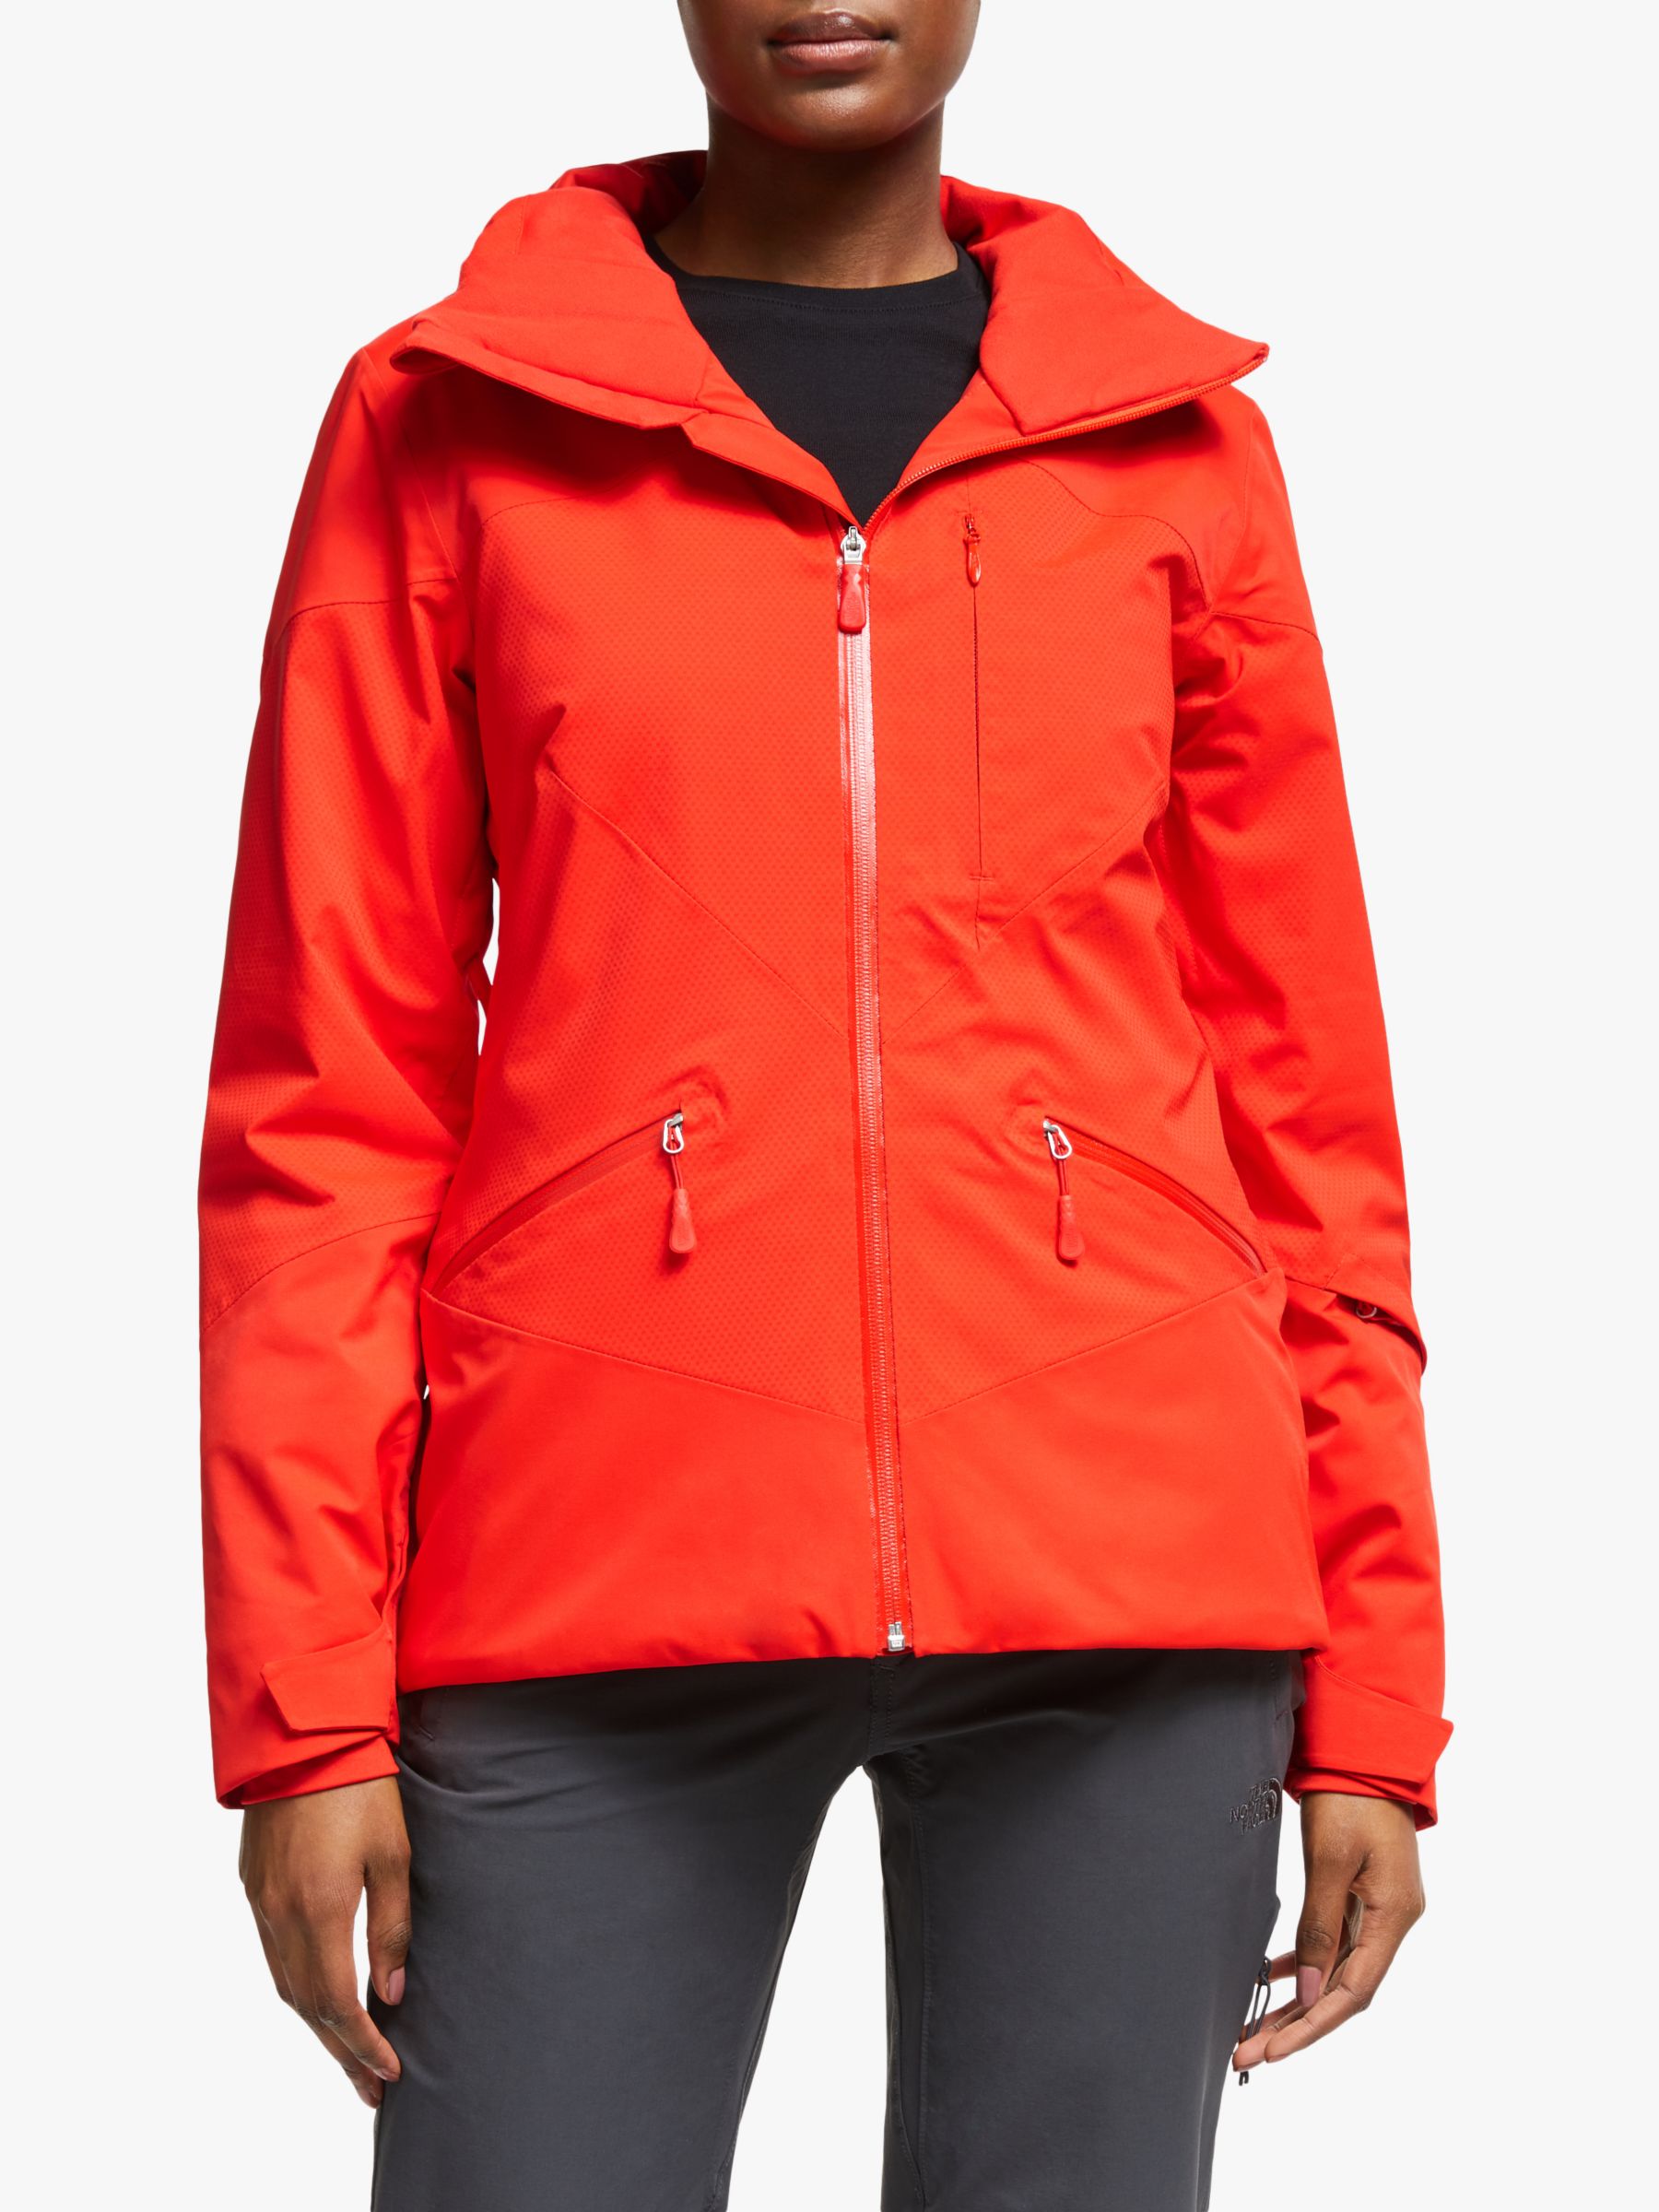 The North Face The North Face Lenado Women's Waterproof Ski Jacket, Fiery Red